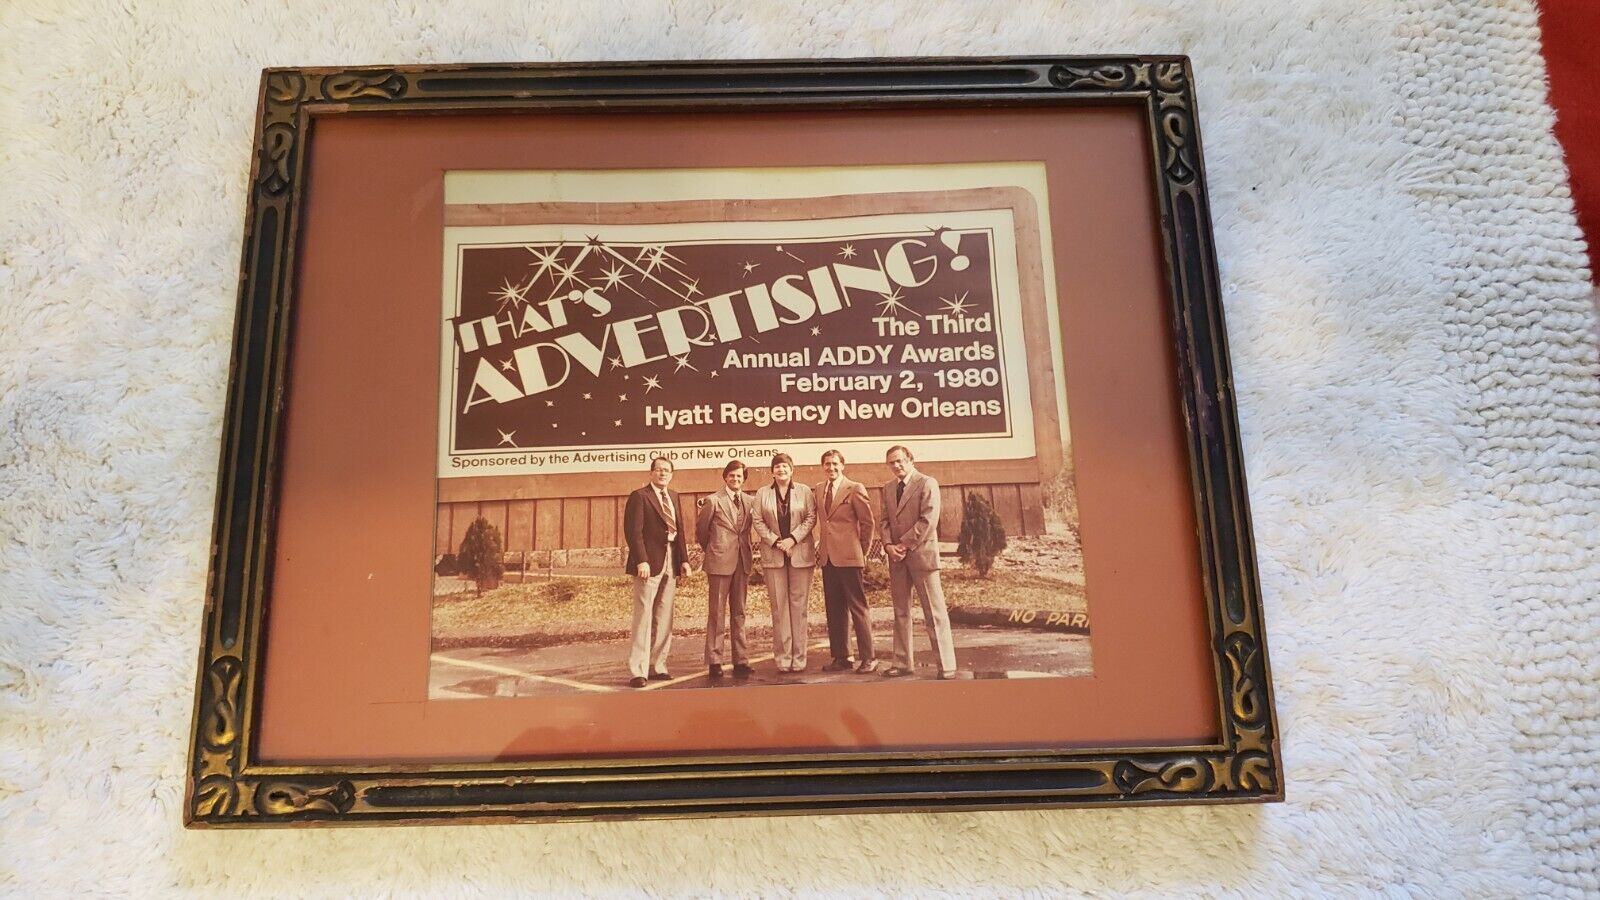 VINTAGE NEW ORLEANS AWARDS PHOTO FRAMED IN WOOD AND GLASS 44 YRS OLD, 